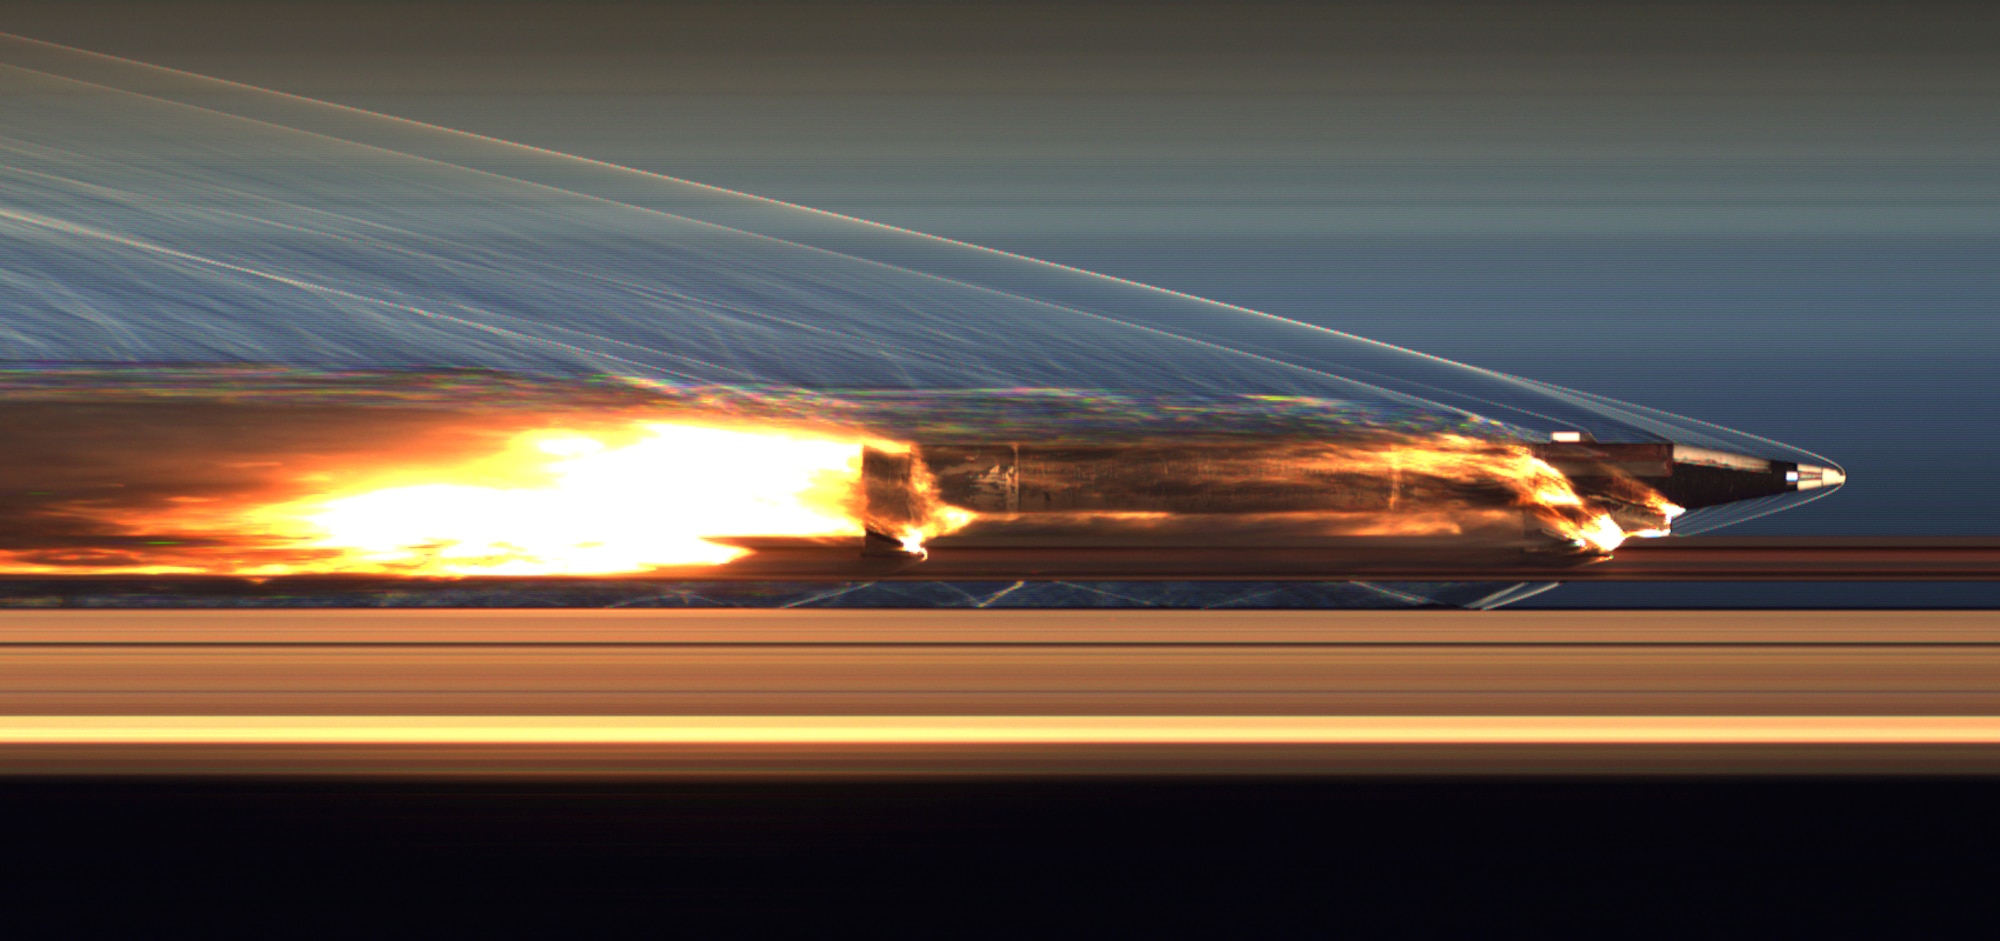 A hypersonic sled travels 6,400-feet per second on a monorail as part of the Hypersonic Sled Recovery effort at the Arnold Engineering Development Complex Holloman High Speed Test Track at Holloman Air Force Base, New Mexico.